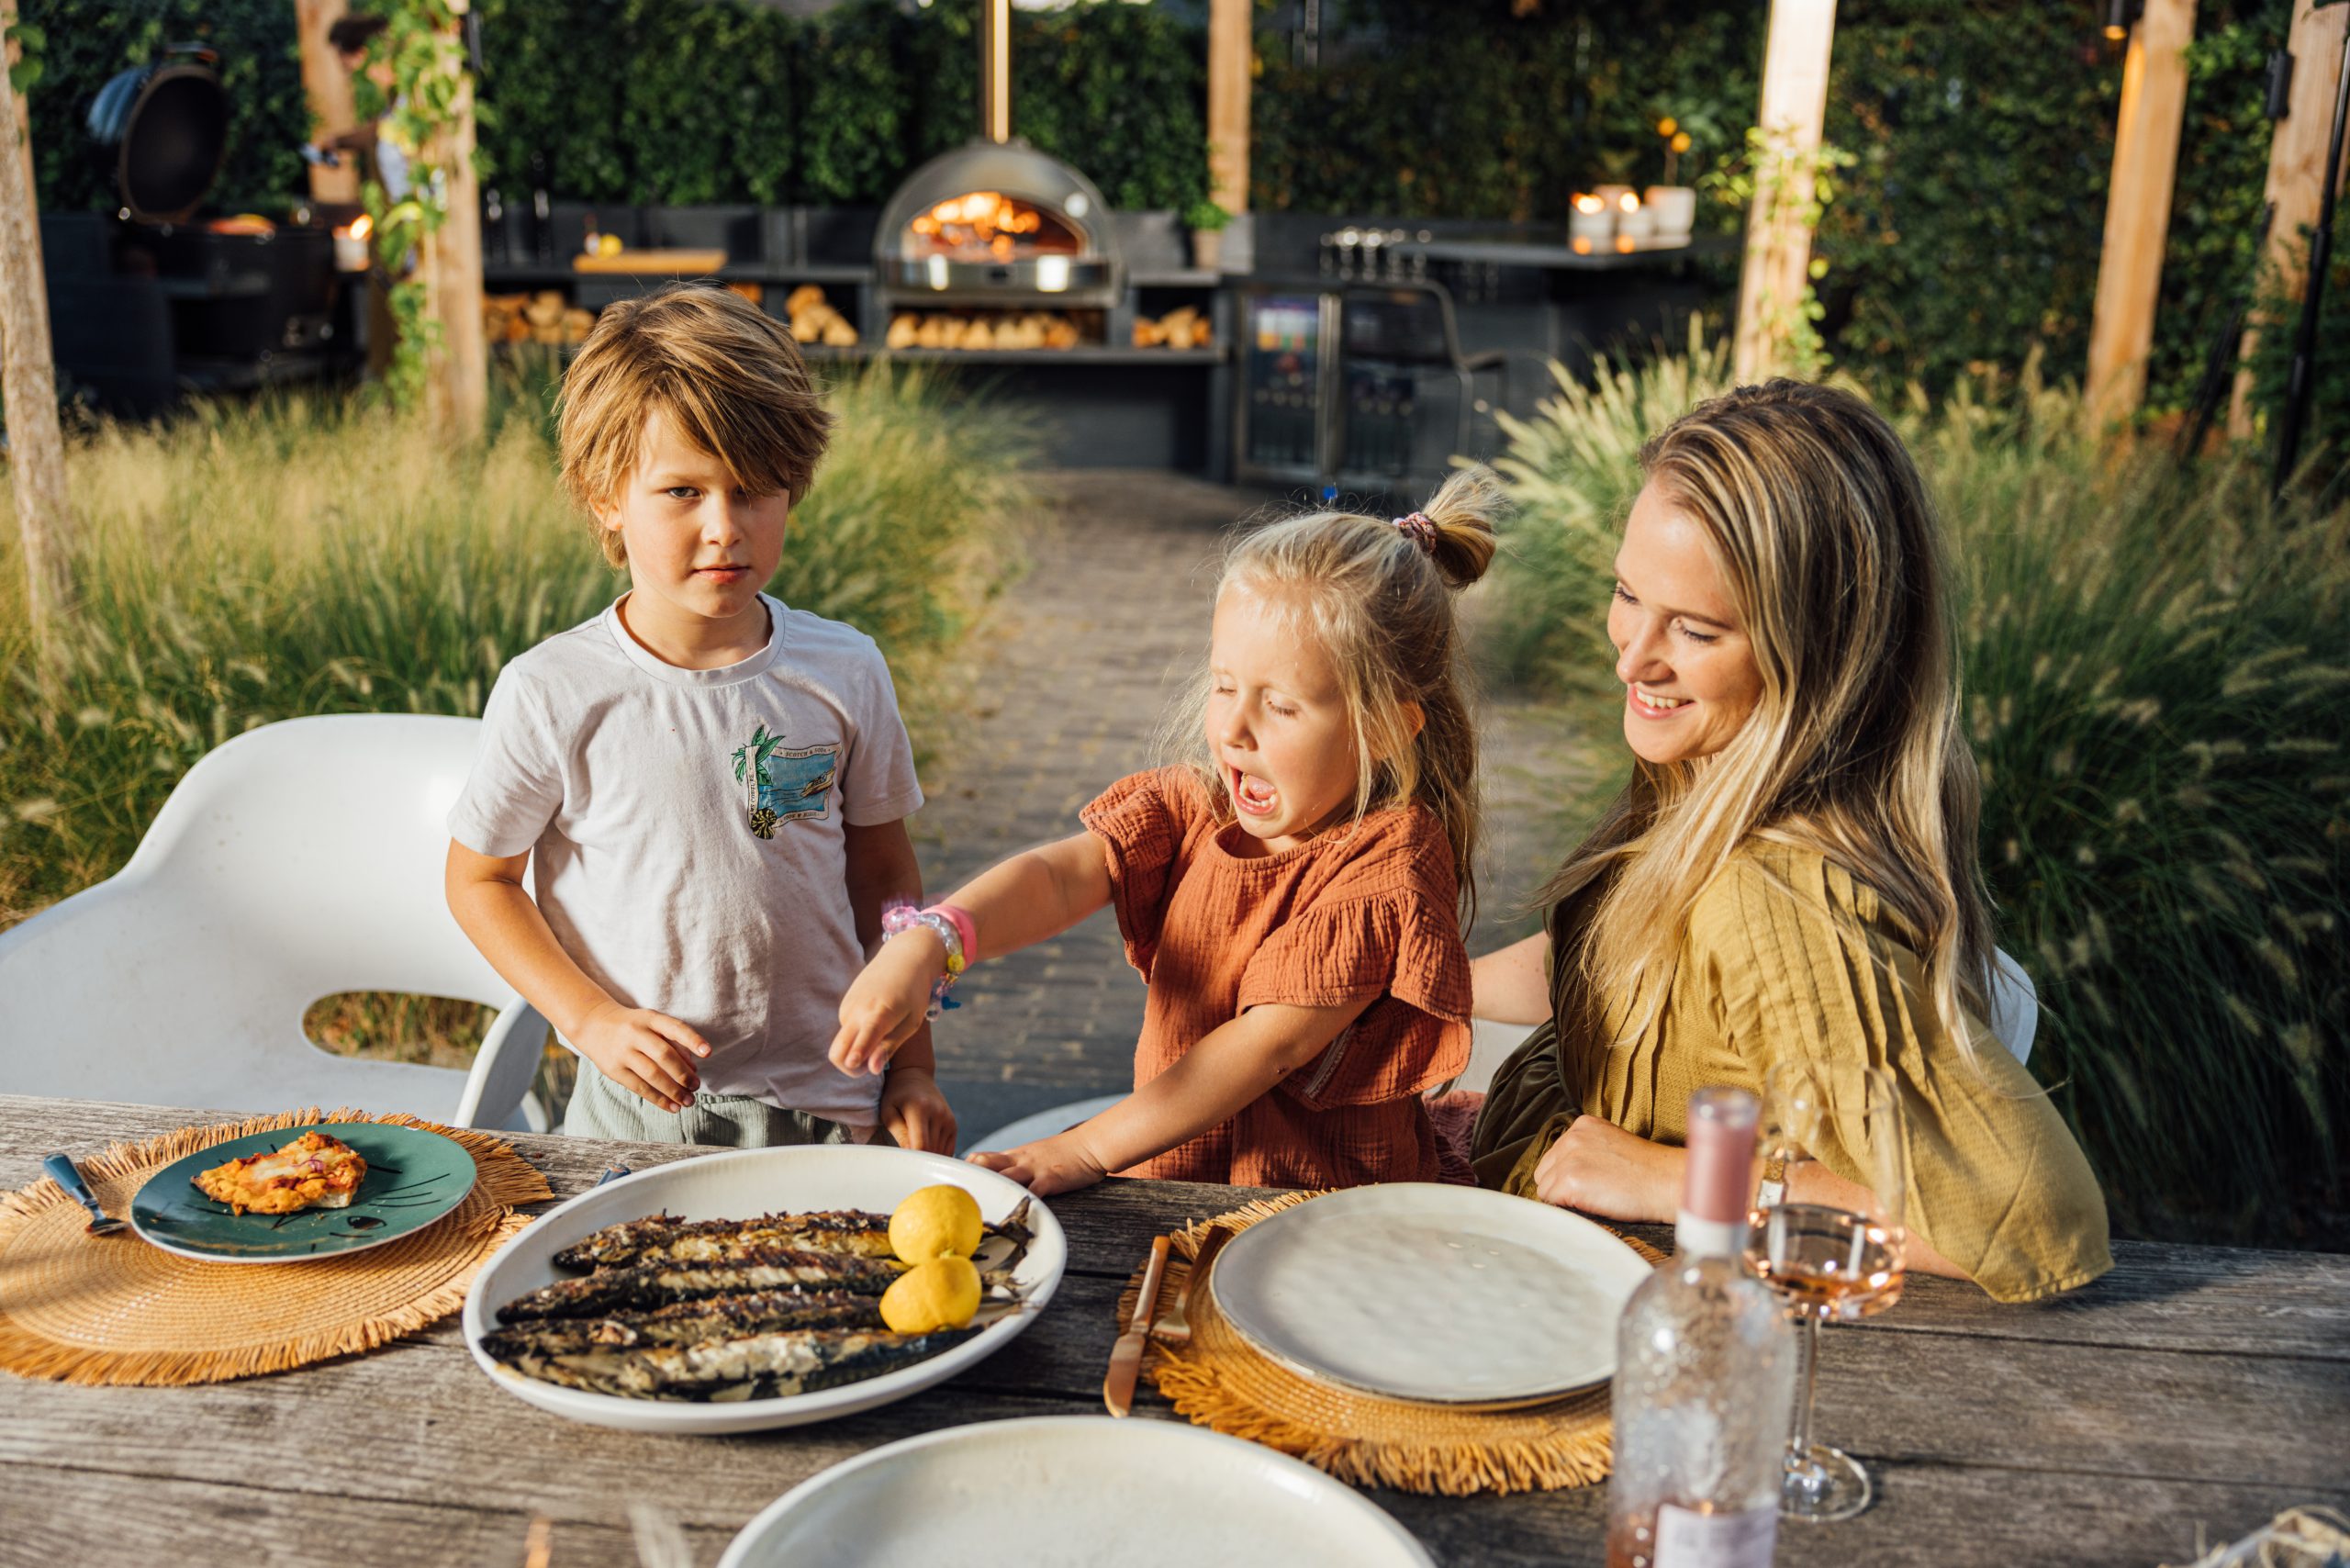 Barts_outdoor_kitchen-family-46